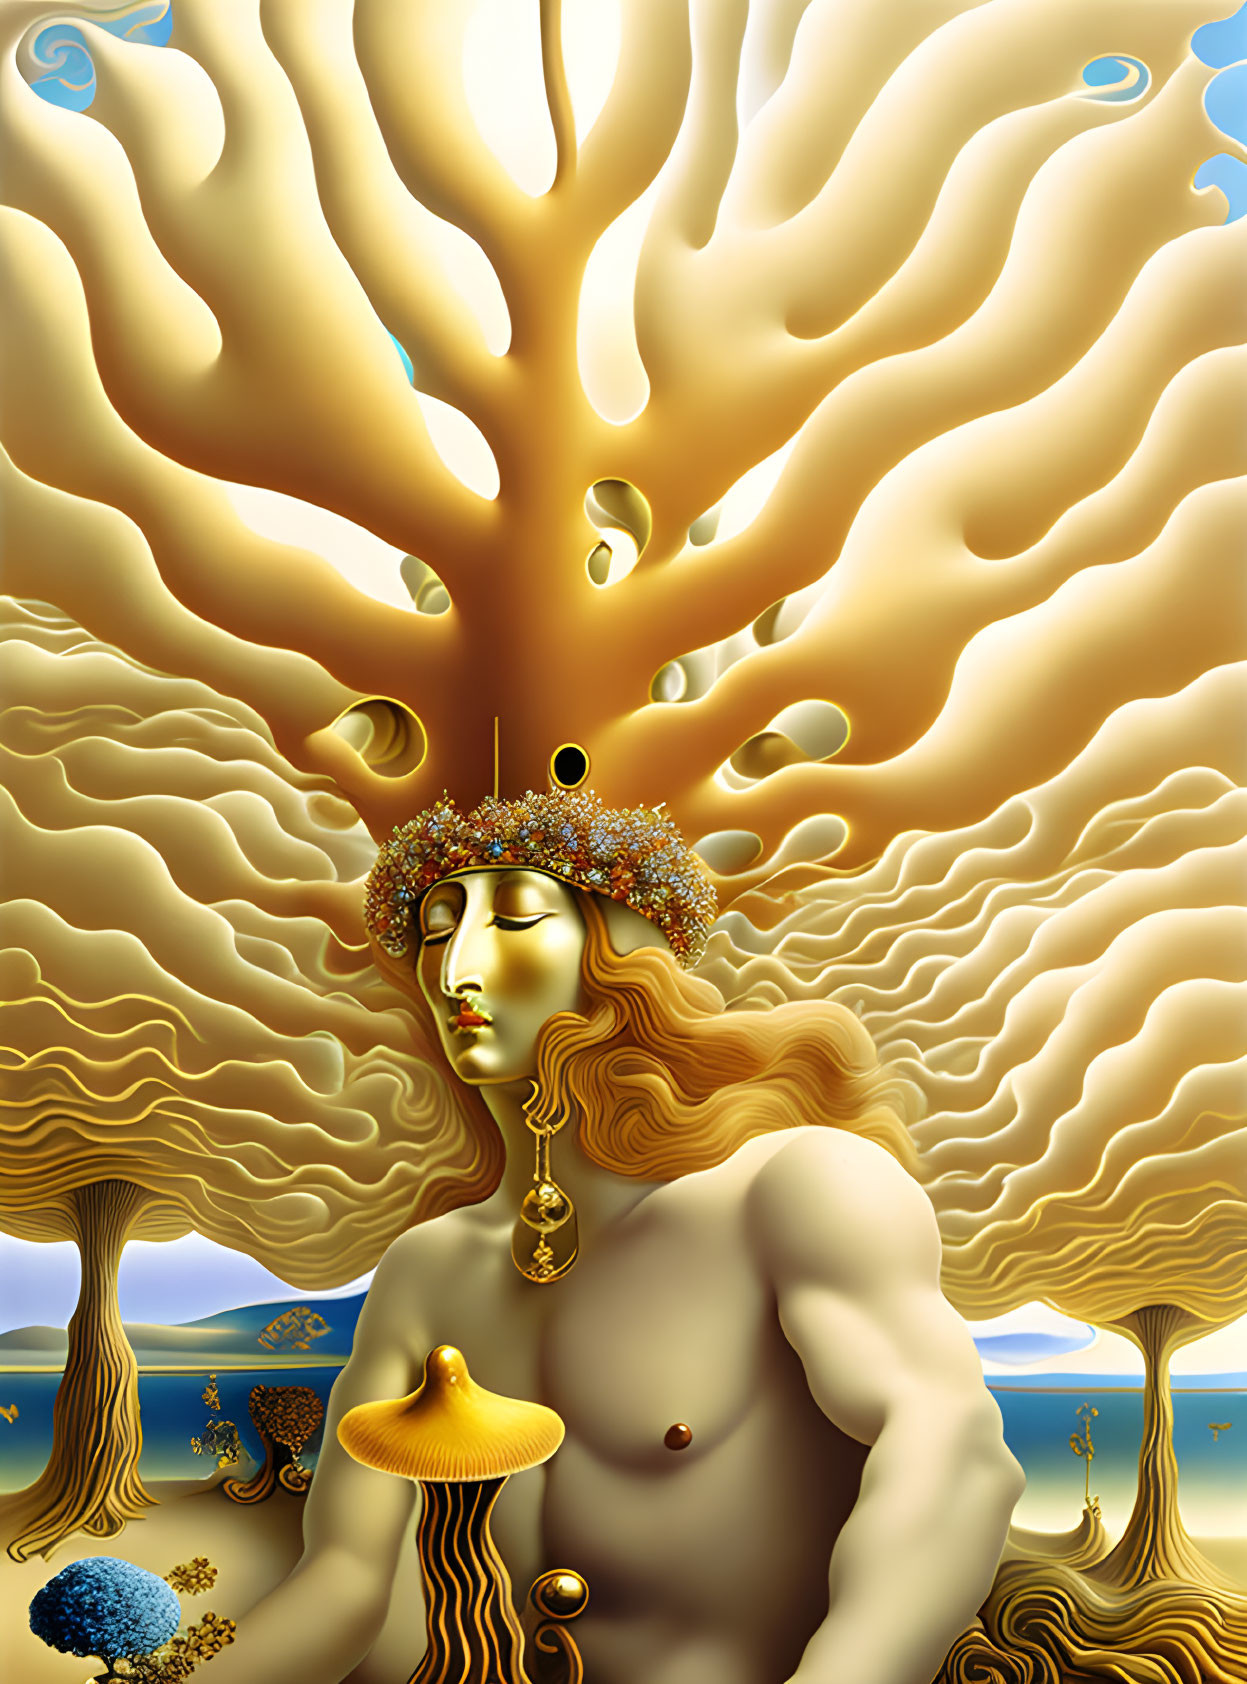 Surreal artwork: Figure with tree head on golden background